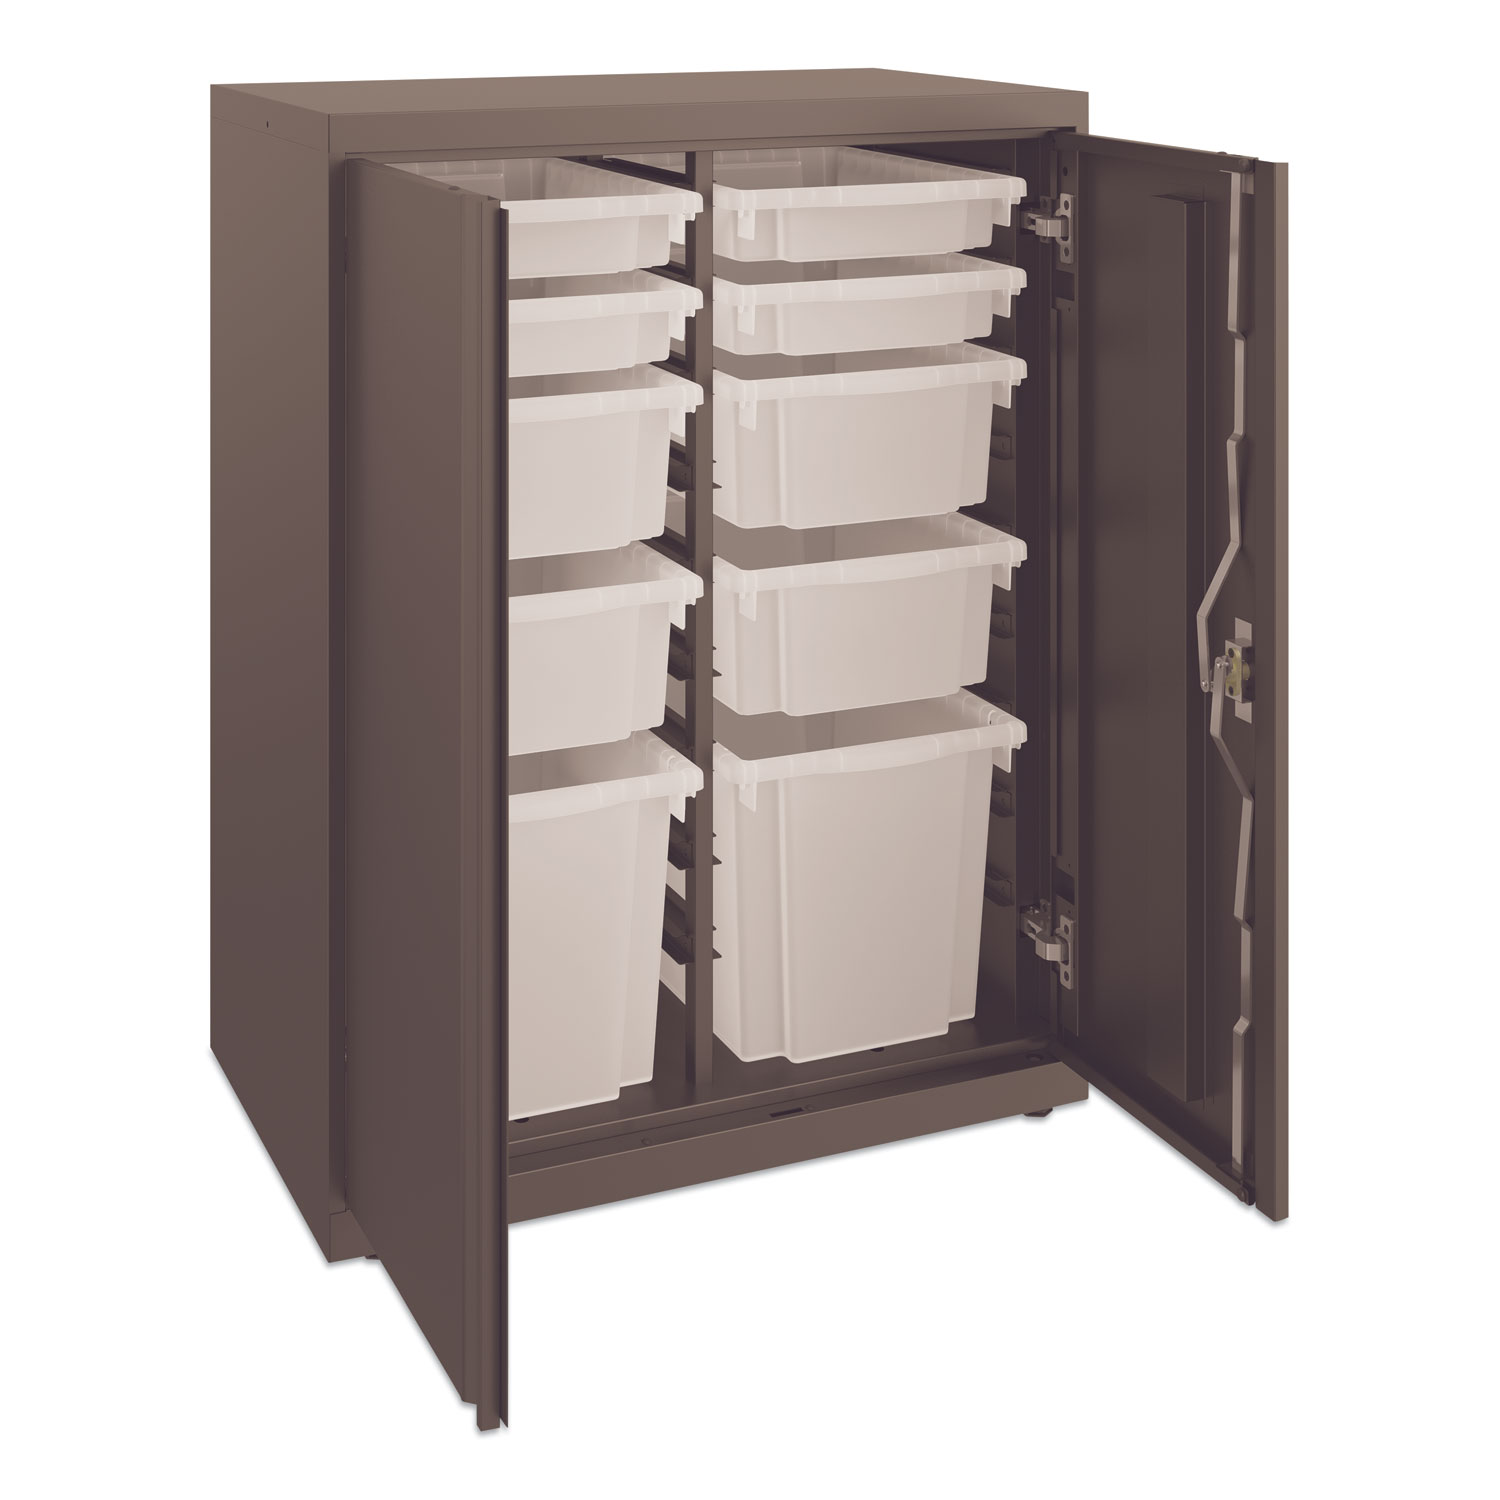  HON HONSC183930LGS Flagship Storage Cabinet with 4 Small, 4 Medium and 2 Large Bins, 30 x 18 x 39.13, Charcoal (HONSC183930LGS) 